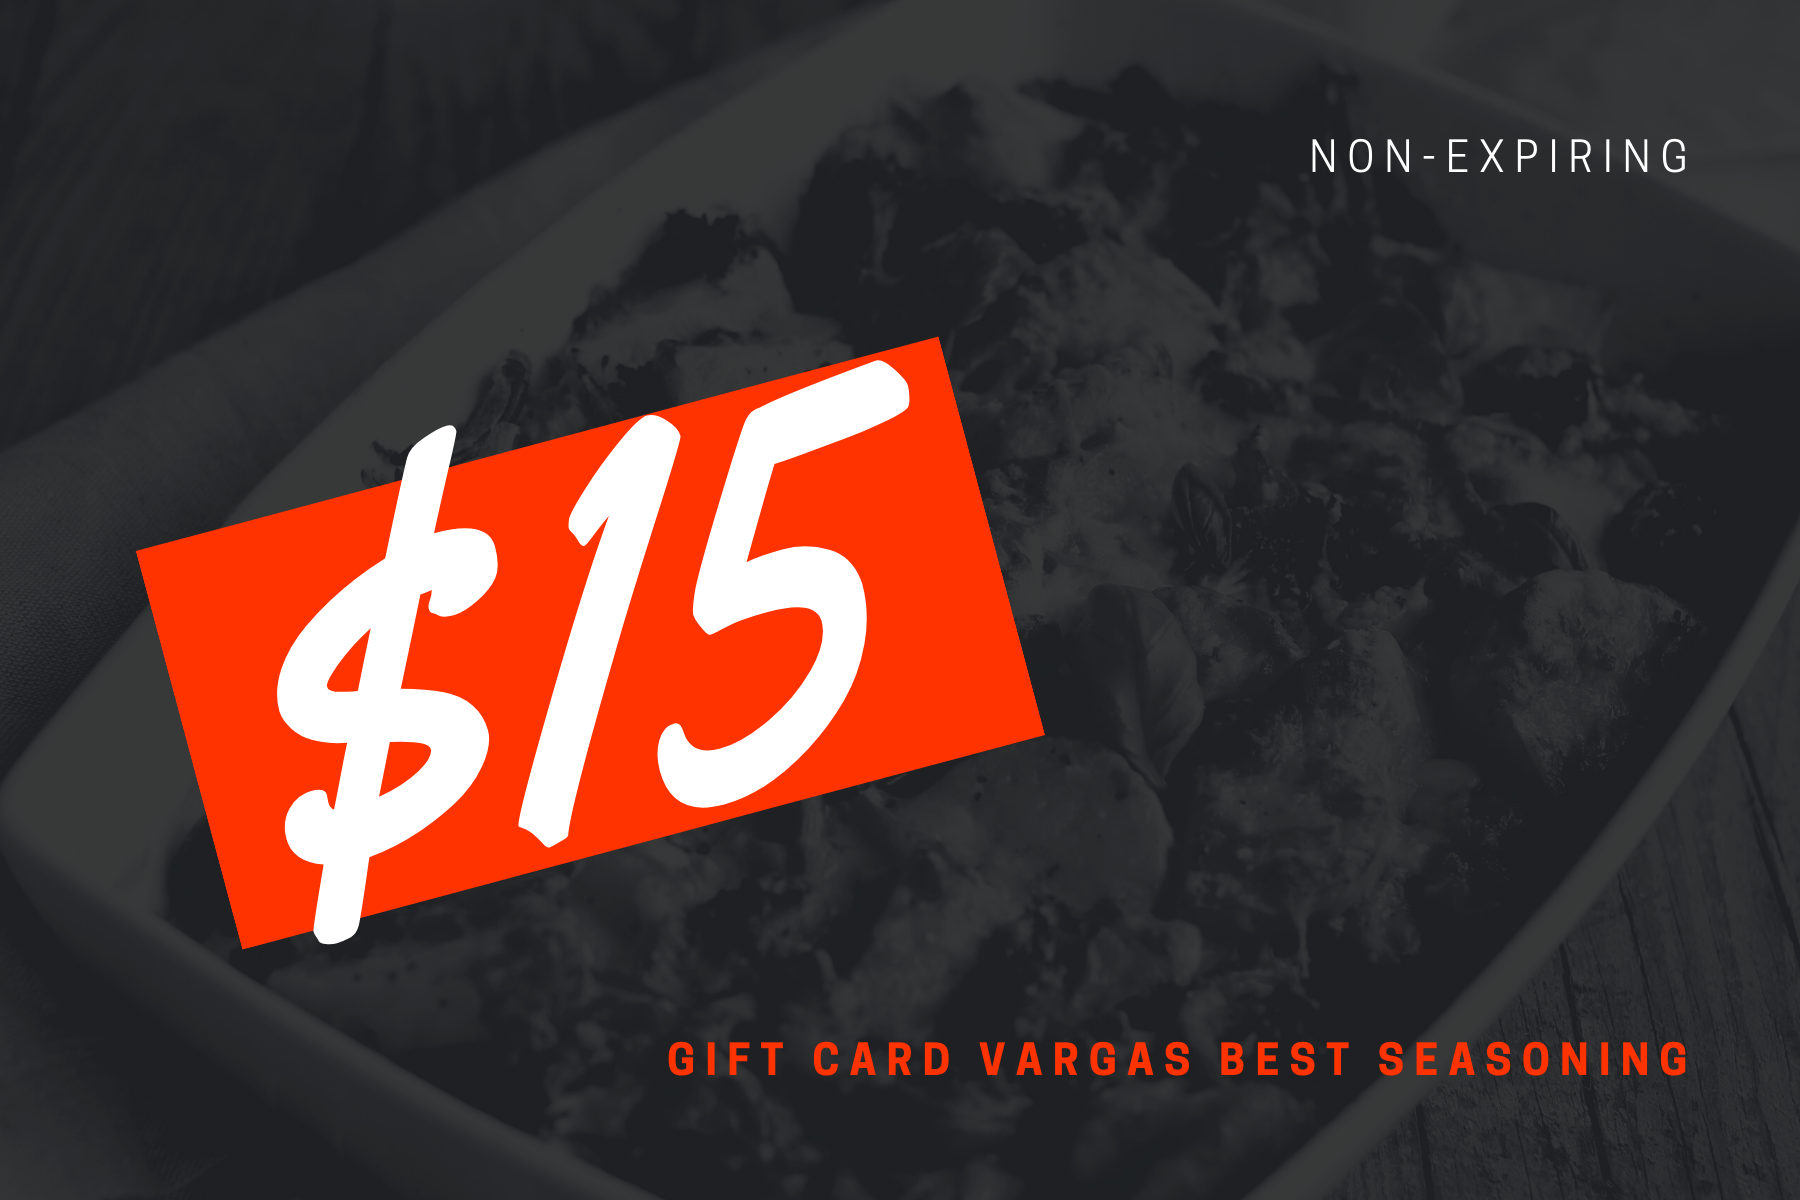 gift card for $15 best seasoning best healthy low sodium 100% All Natural ingredients